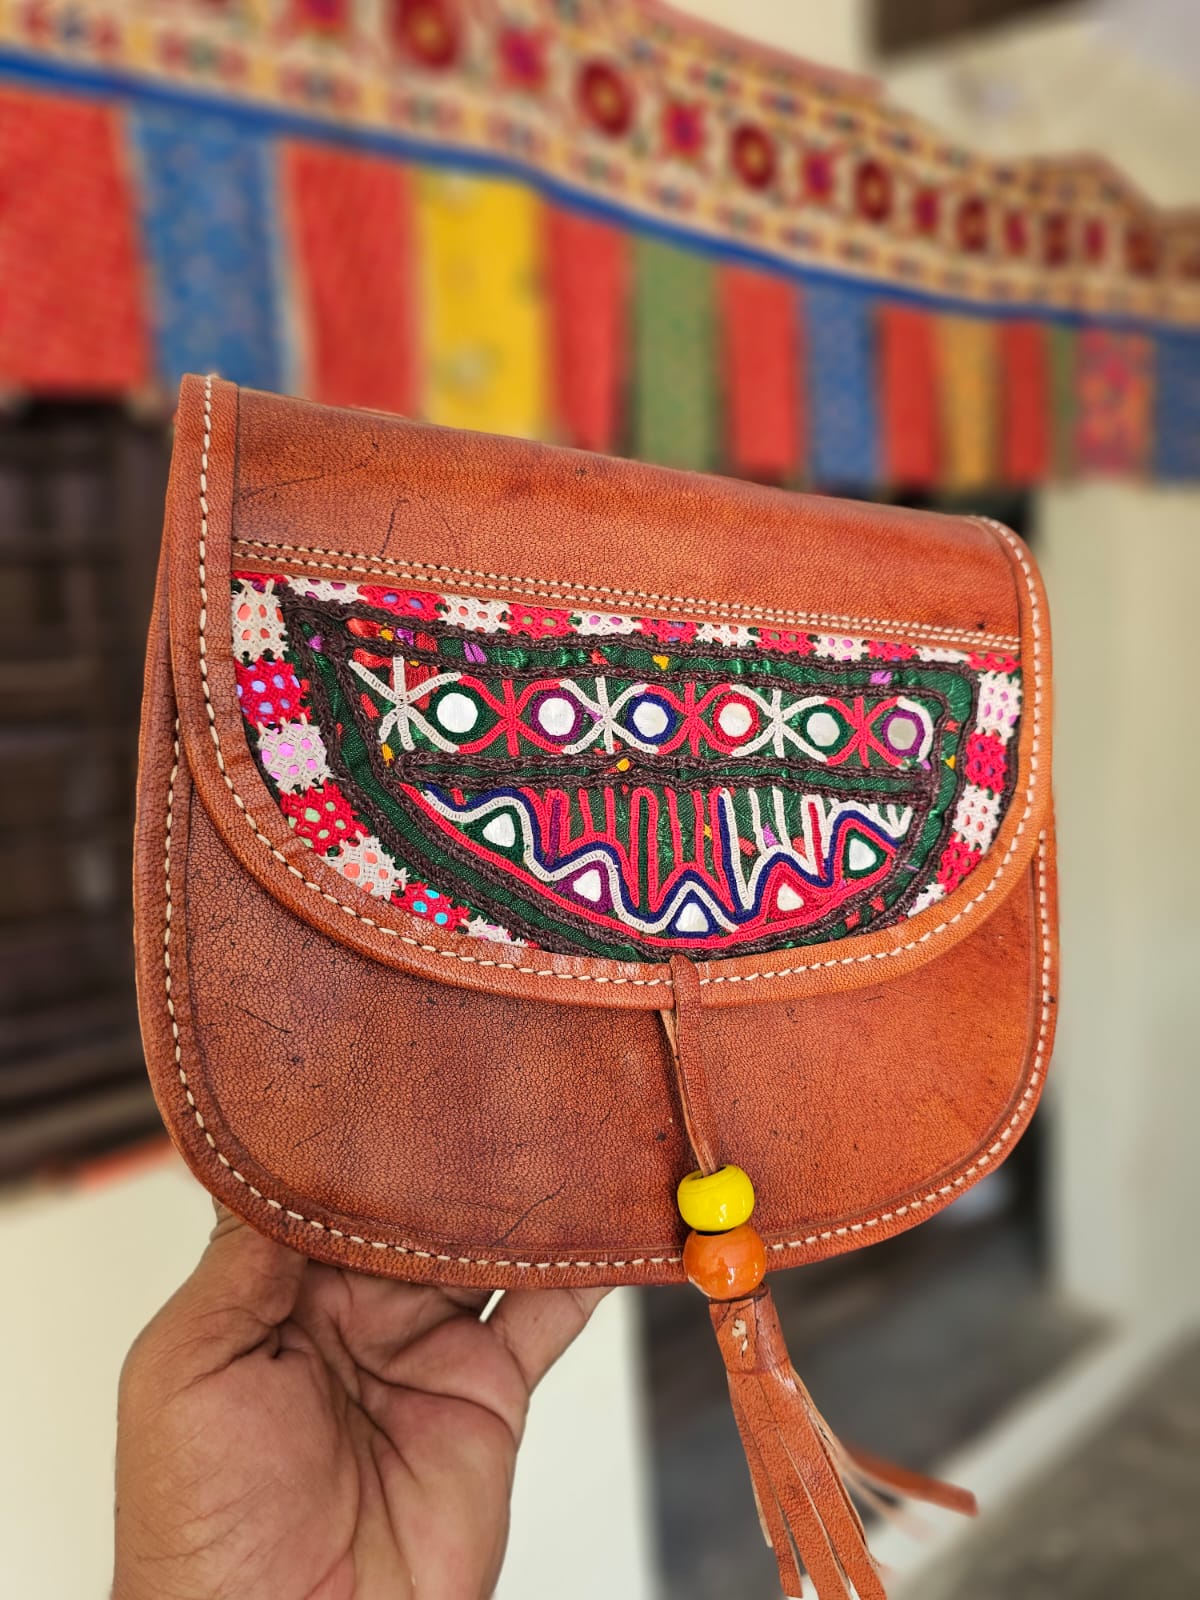 Buy SHUBHANGI COLLECTIONS Women's Leather Purse Handicraft Embroidered  Jaipuri Traditional Ethnic Rajasthani Bridal Purse (Multicolour/Brown) at  Amazon.in